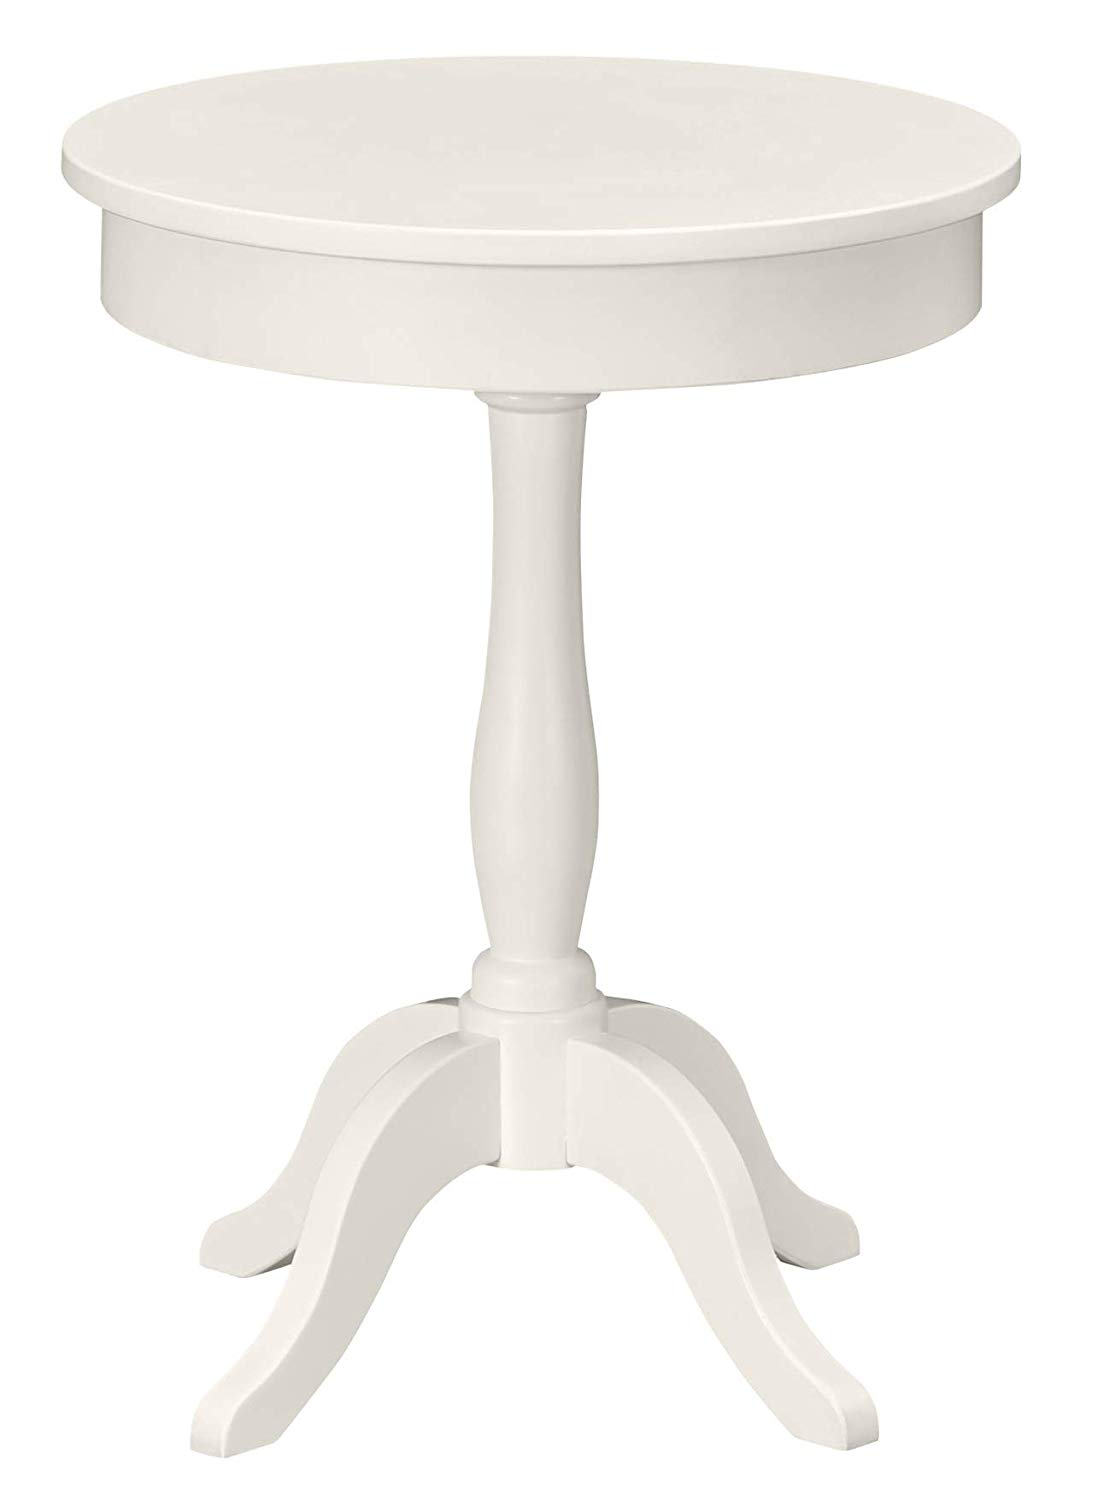 ravenna home morley classic round pedestal end table accent with screw legs white kitchen dining patio coffee and side tables nautical unfinished wood tops contemporary long sofa